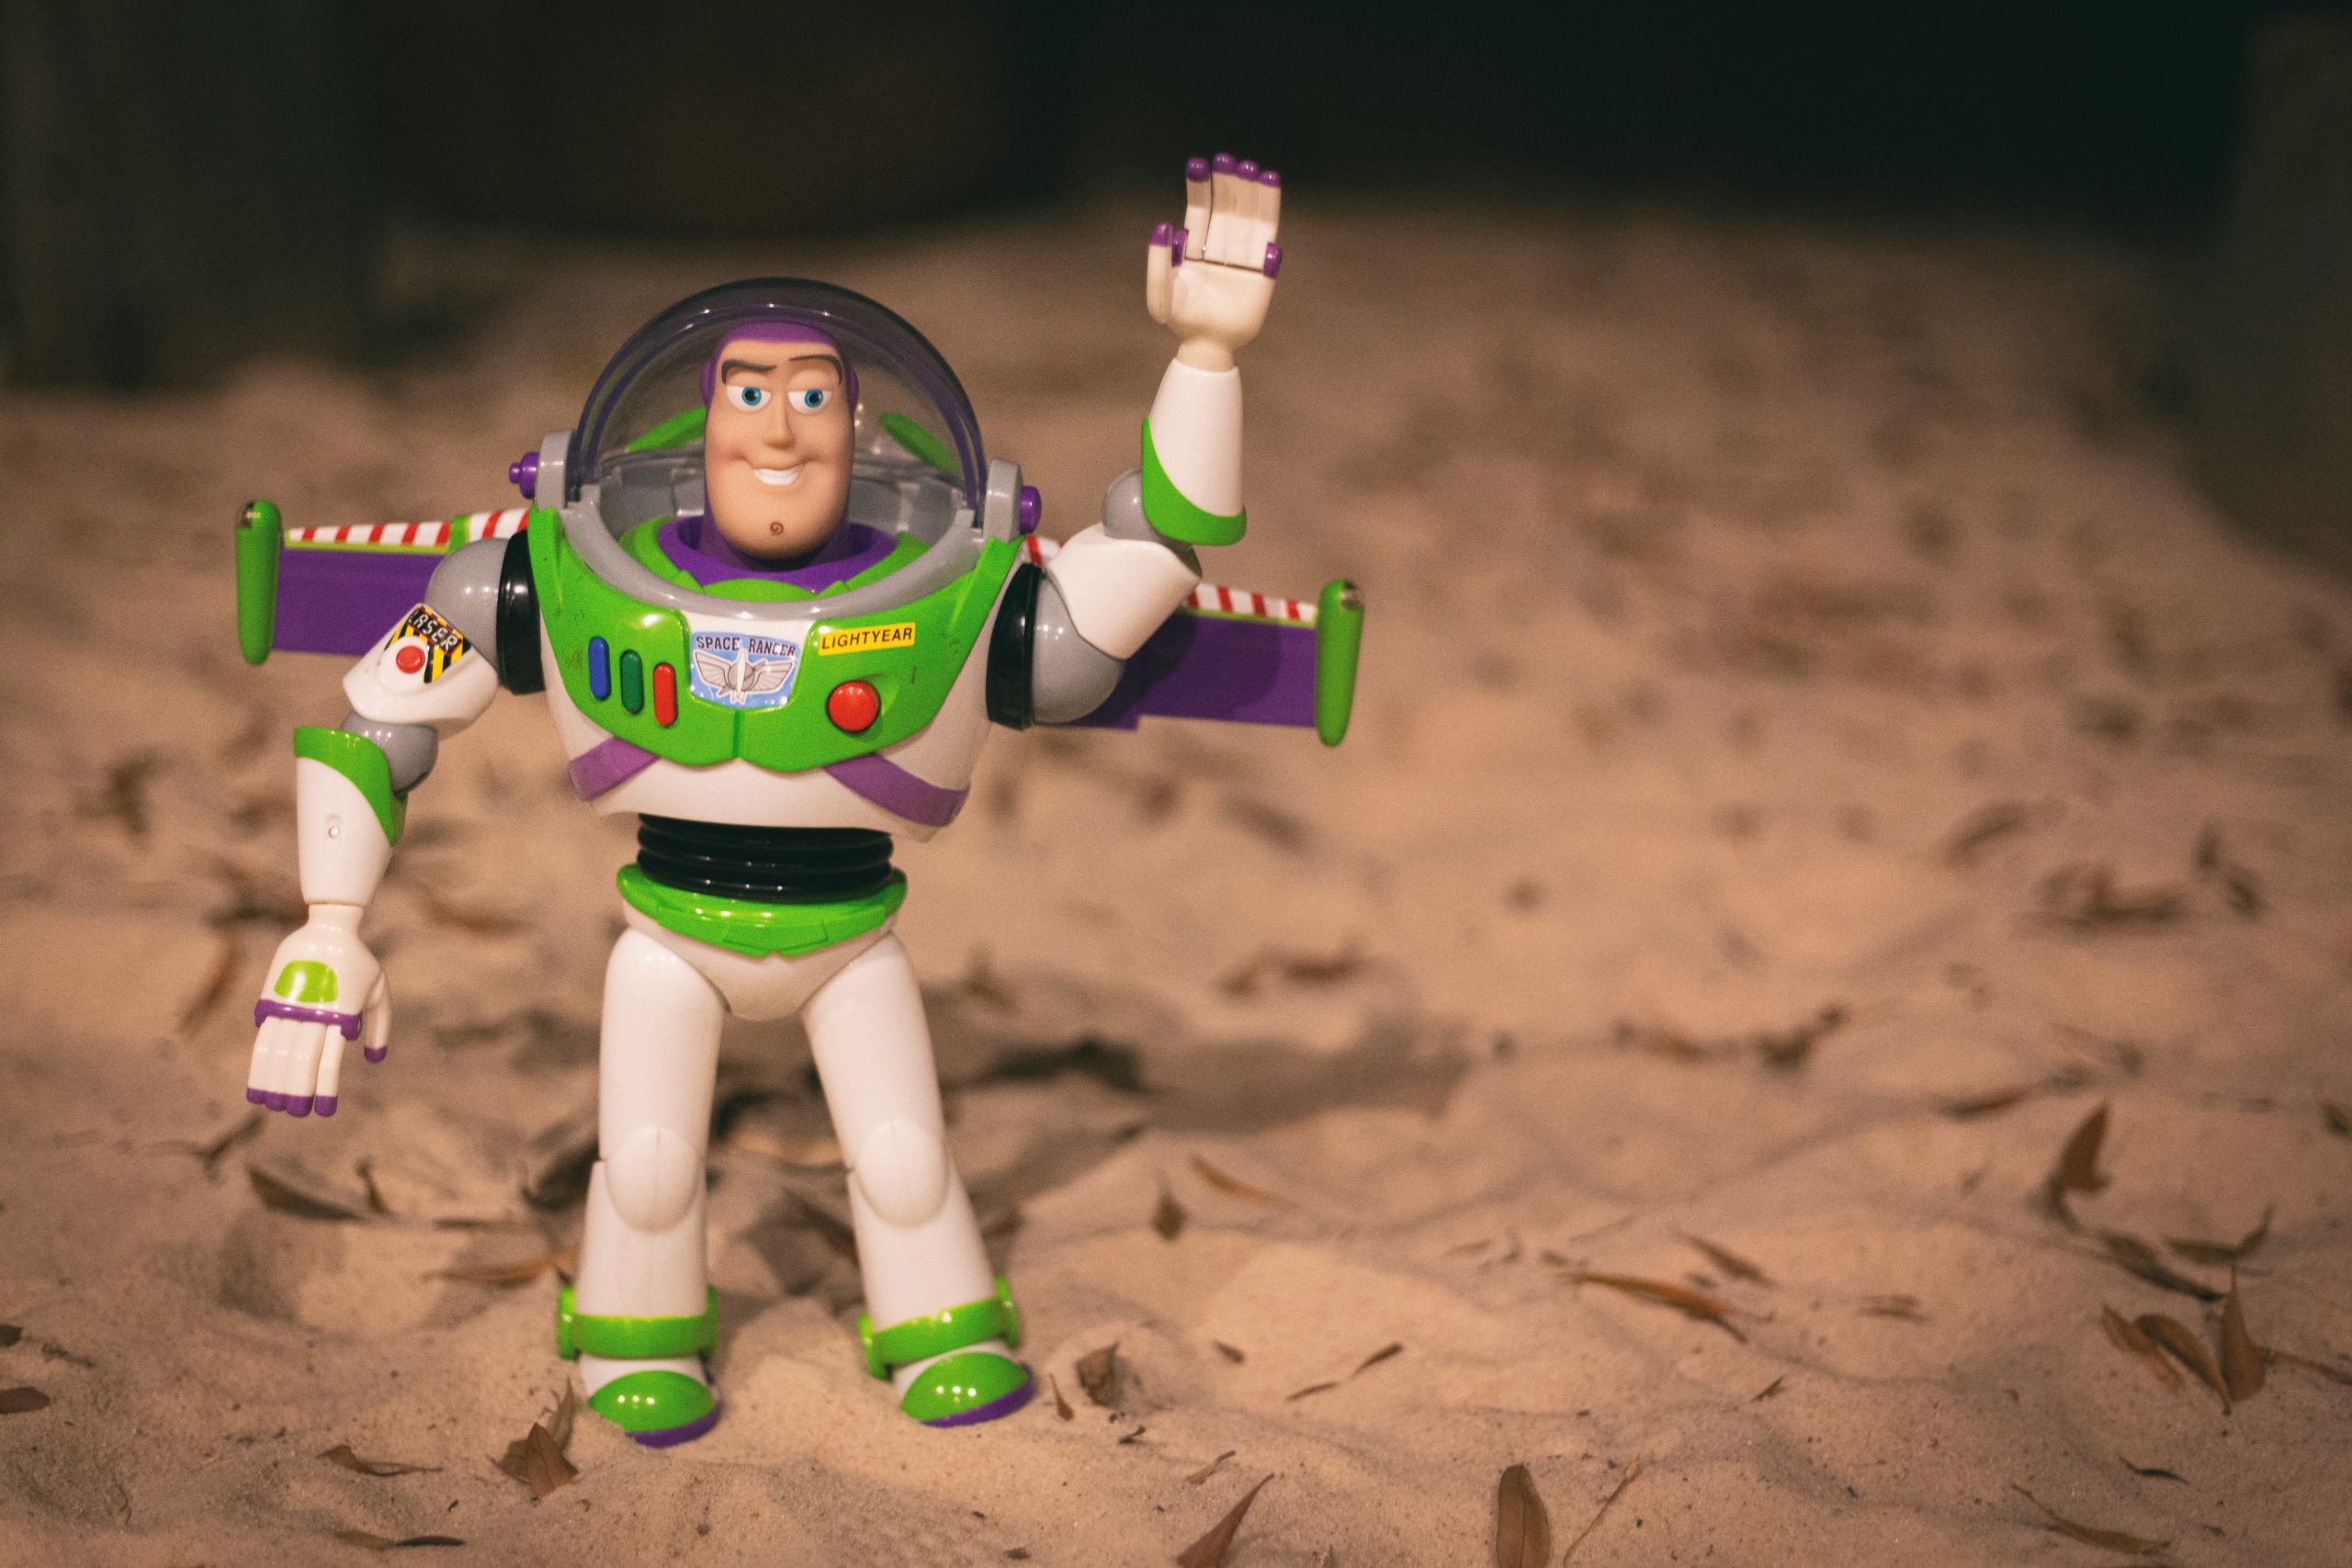 Disney’s newest Pixar film, Lightyear, isn’t doing great at the box office. While critics puzzle over why, an obvious reason is parents are tiring of the constant indoctrination in sexual matters. They feel betrayed by the once trusted Toy Story franchise.